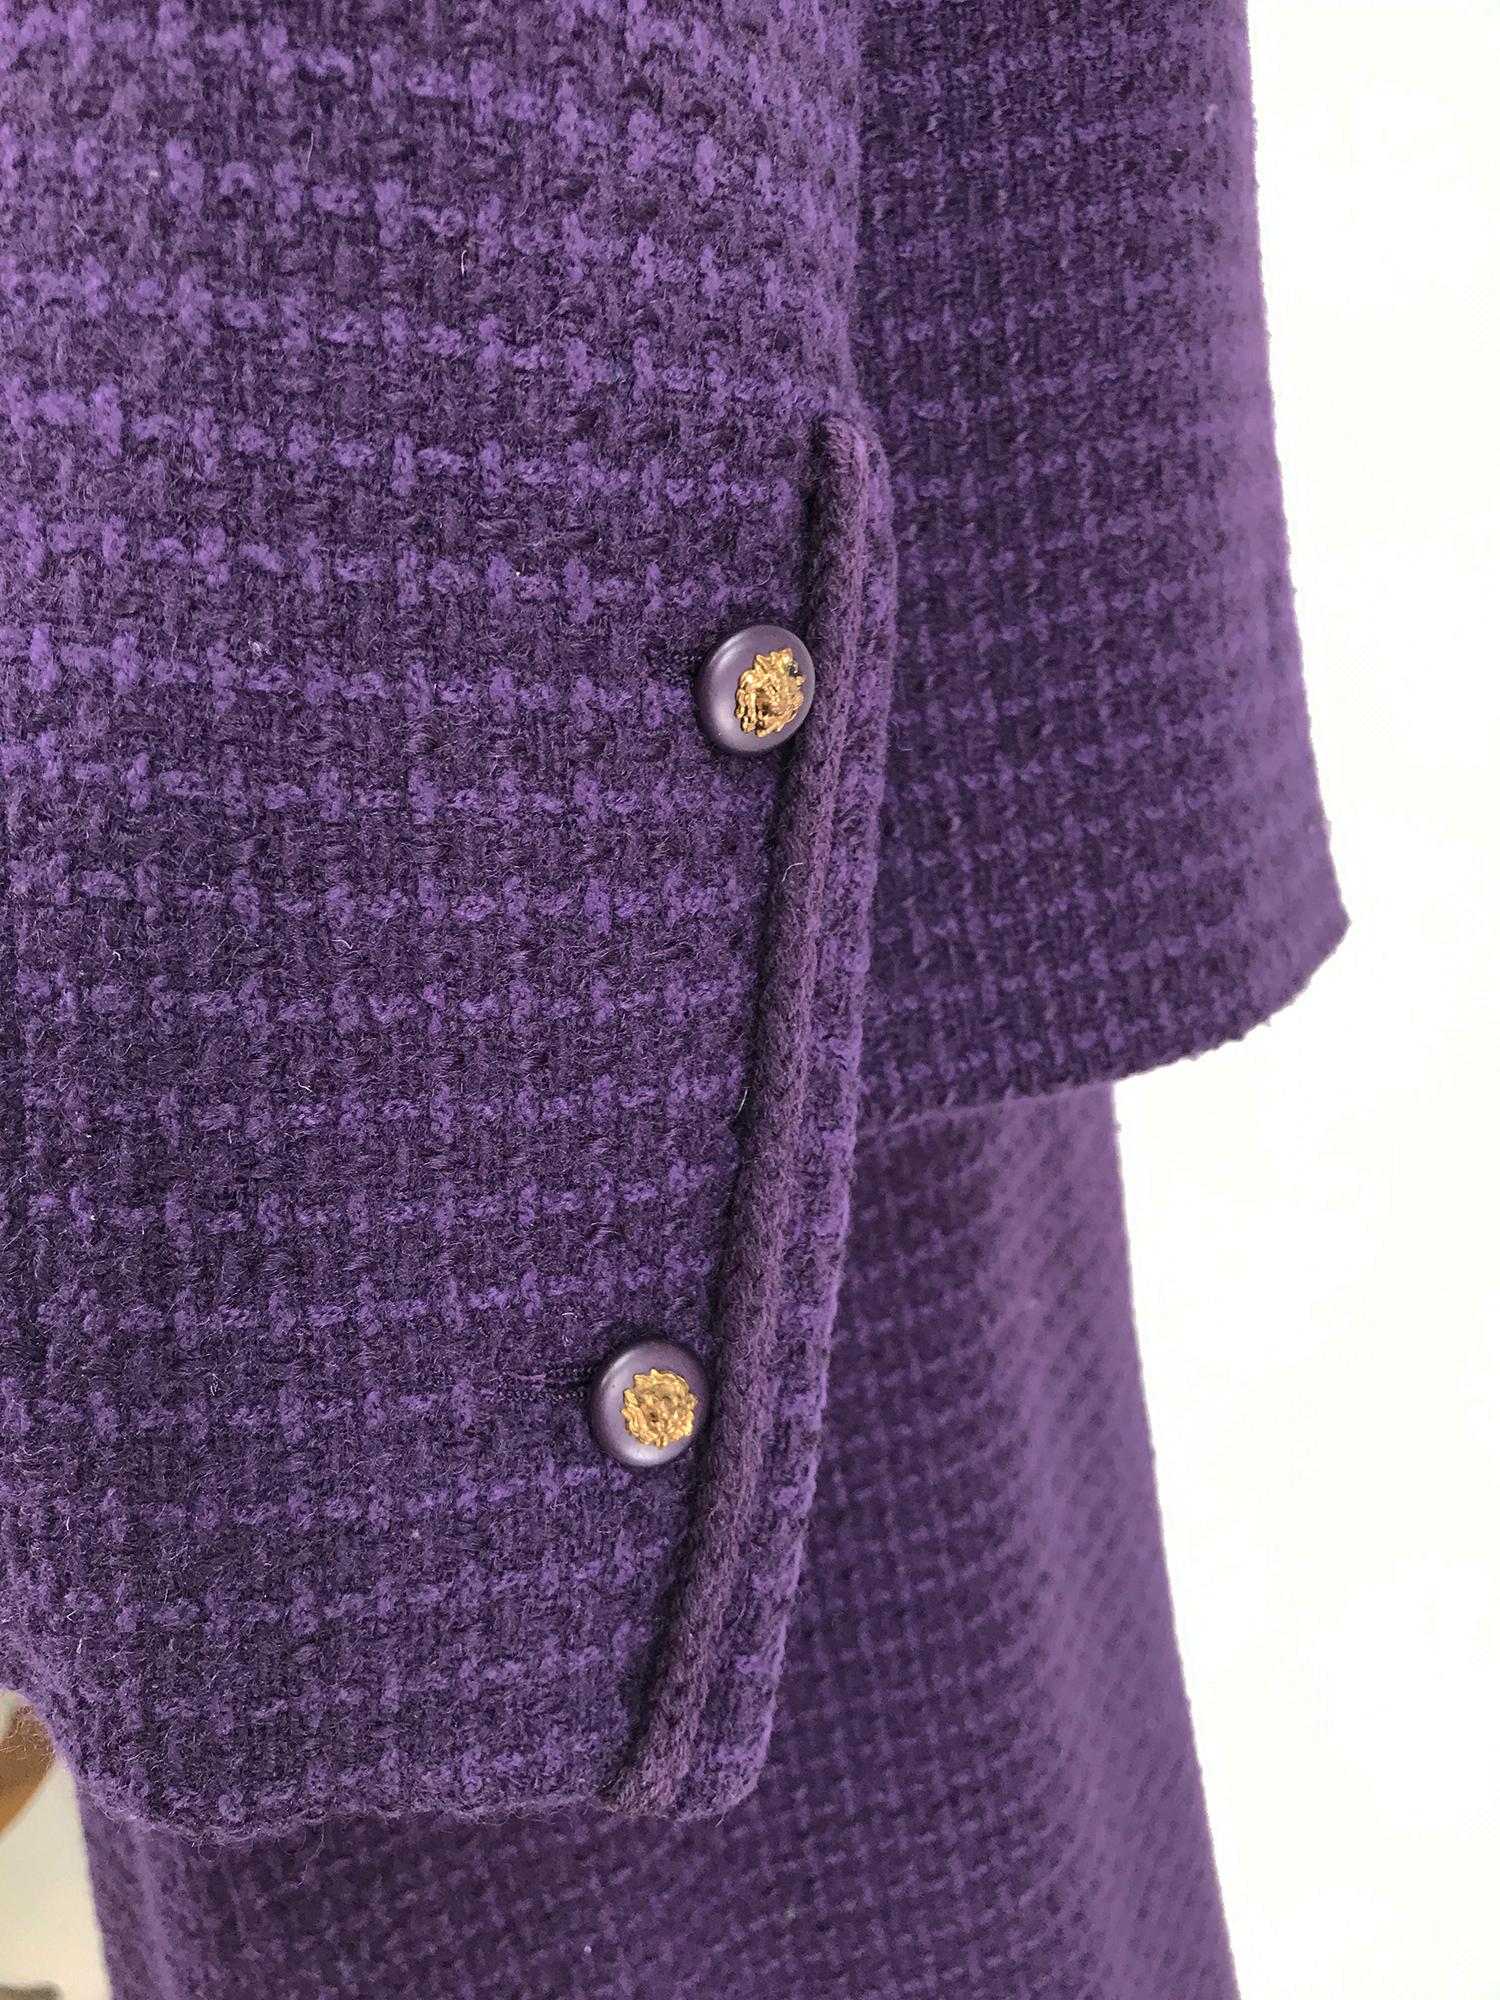 Vintage Chanel Creations Textured Purple Wool Skirt Suit 1970s For Sale 3